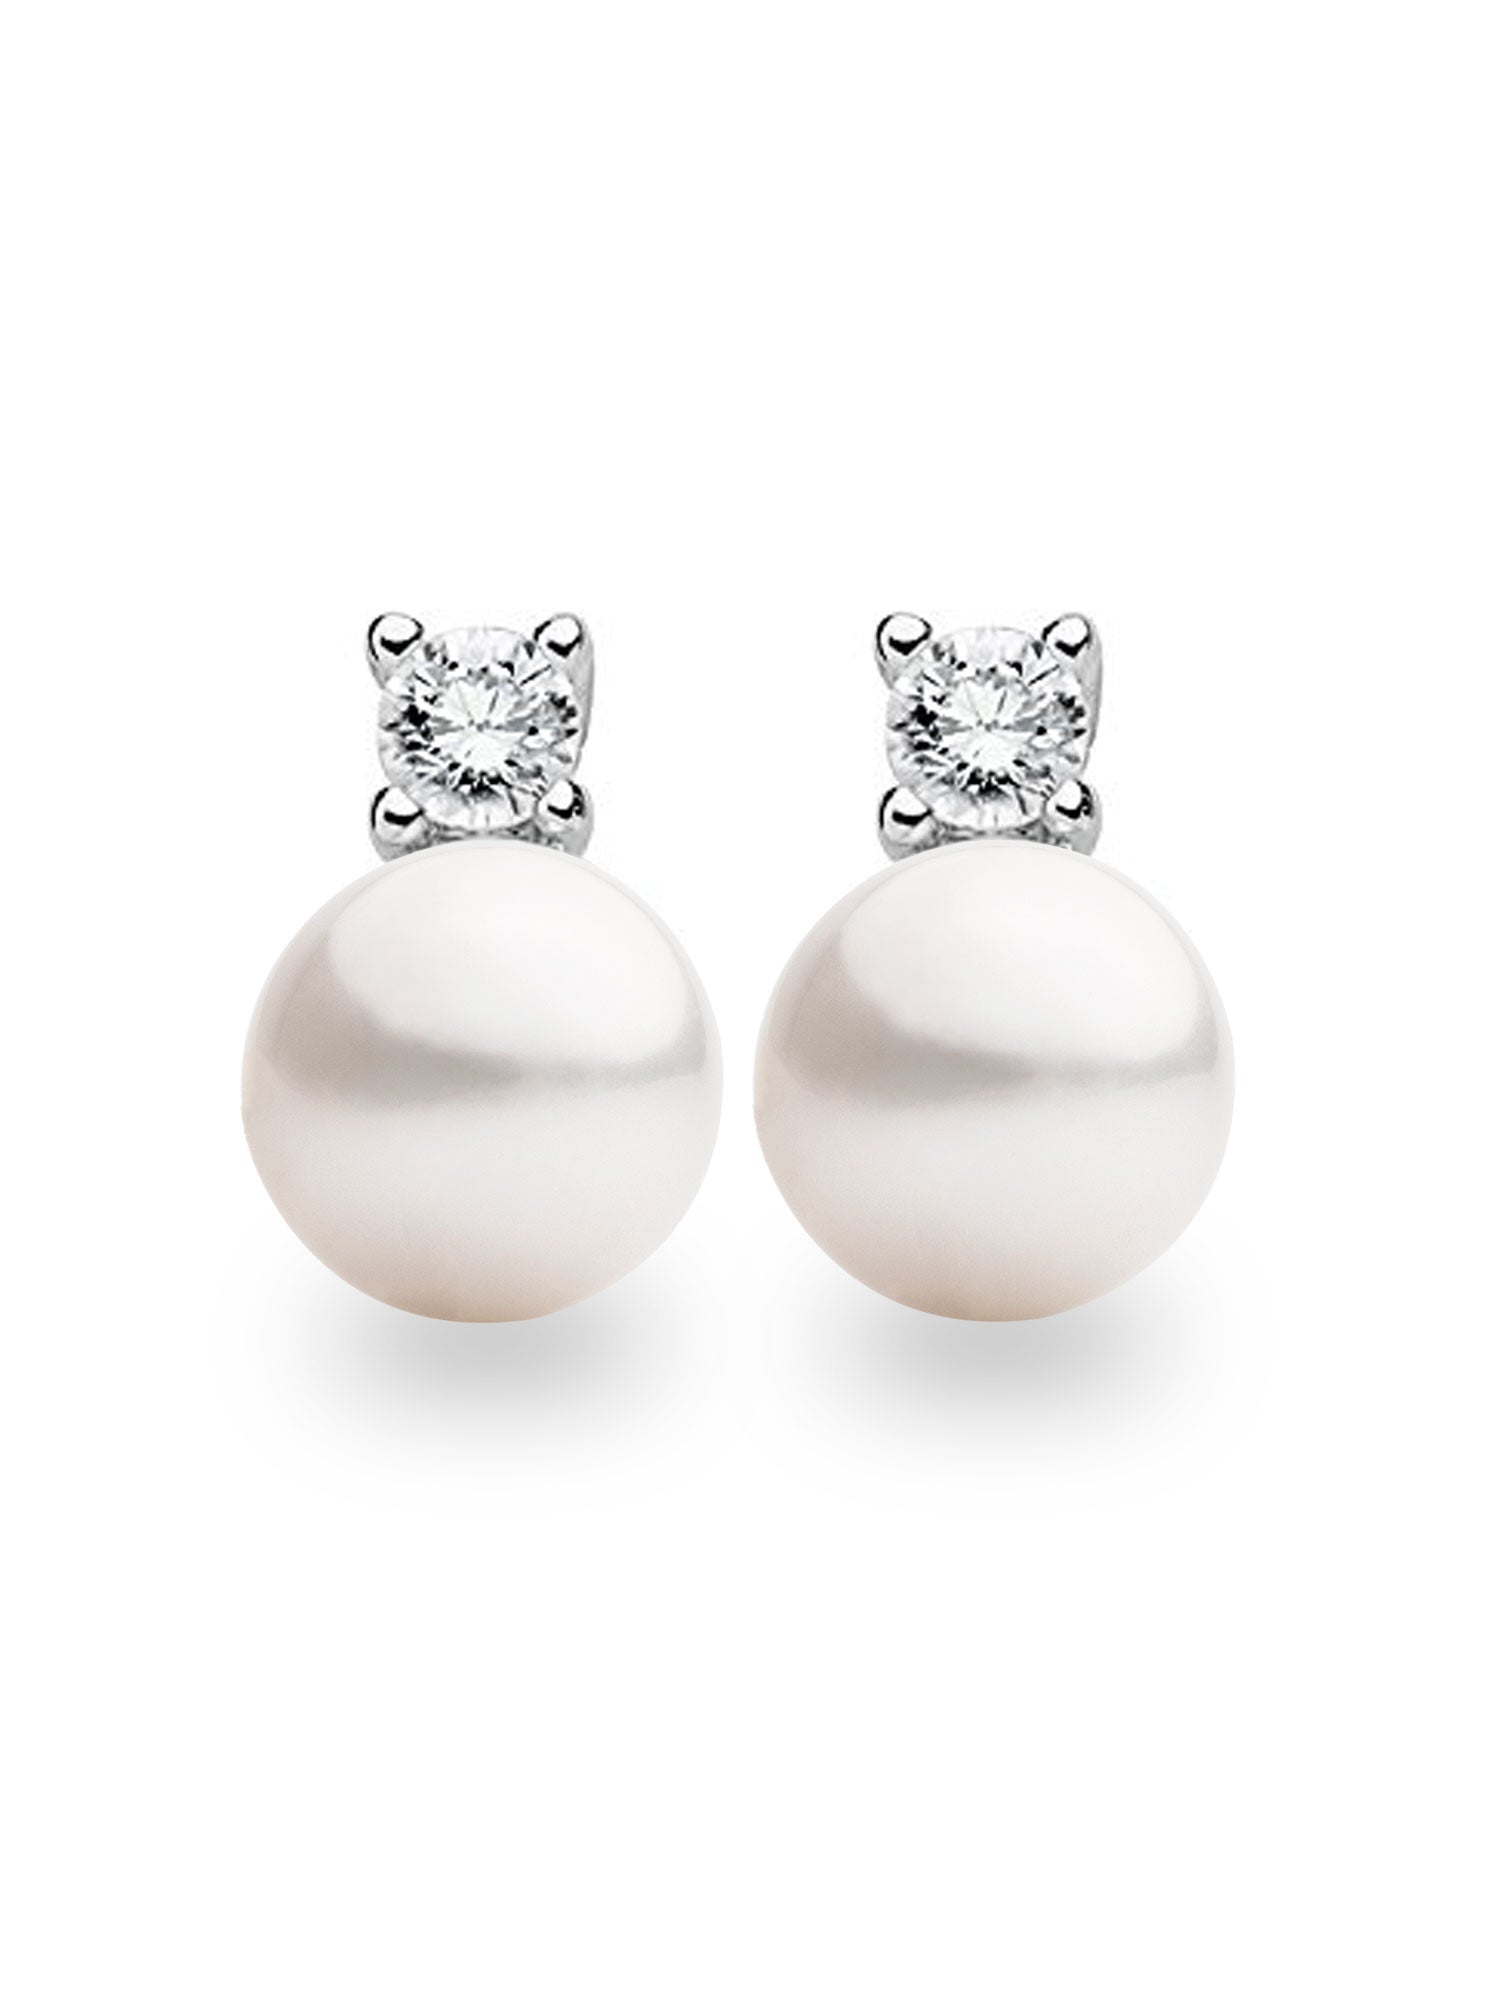 Freshwater Pearl Button Earrings 10.5-11mm Sterling Silver with Zirconia